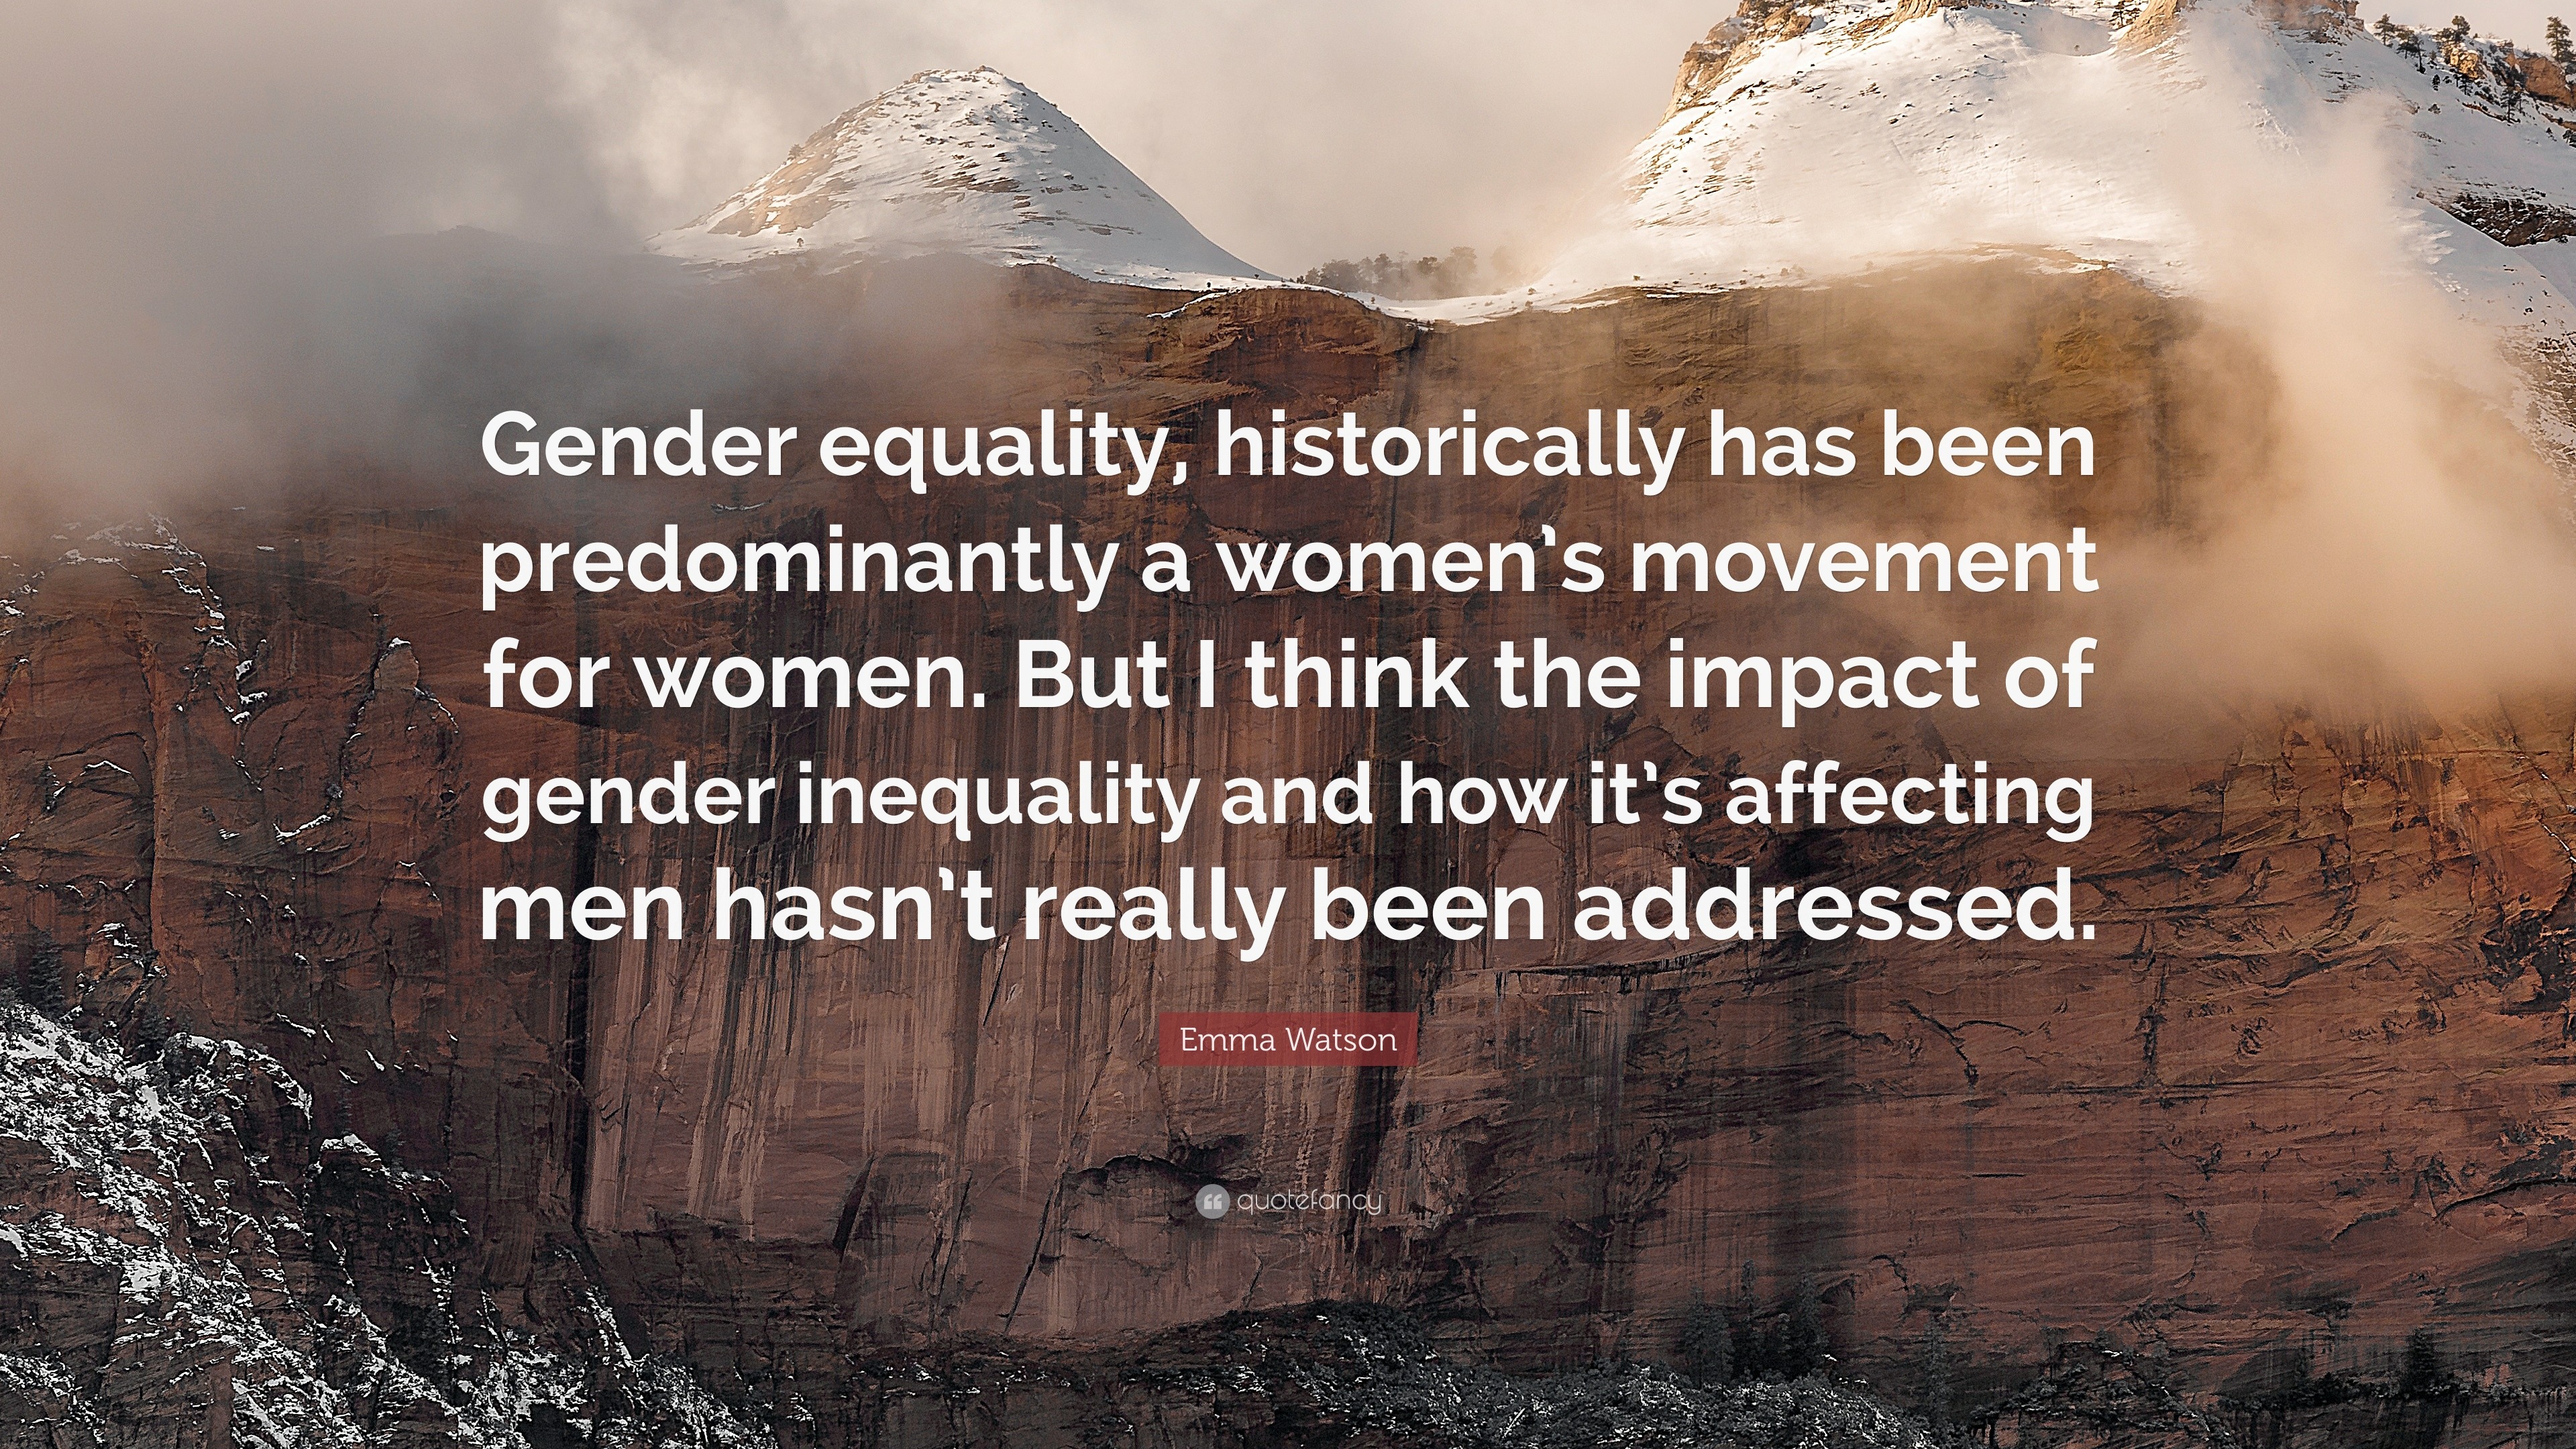 Emma Watson Quote “Gender equality, historically has been